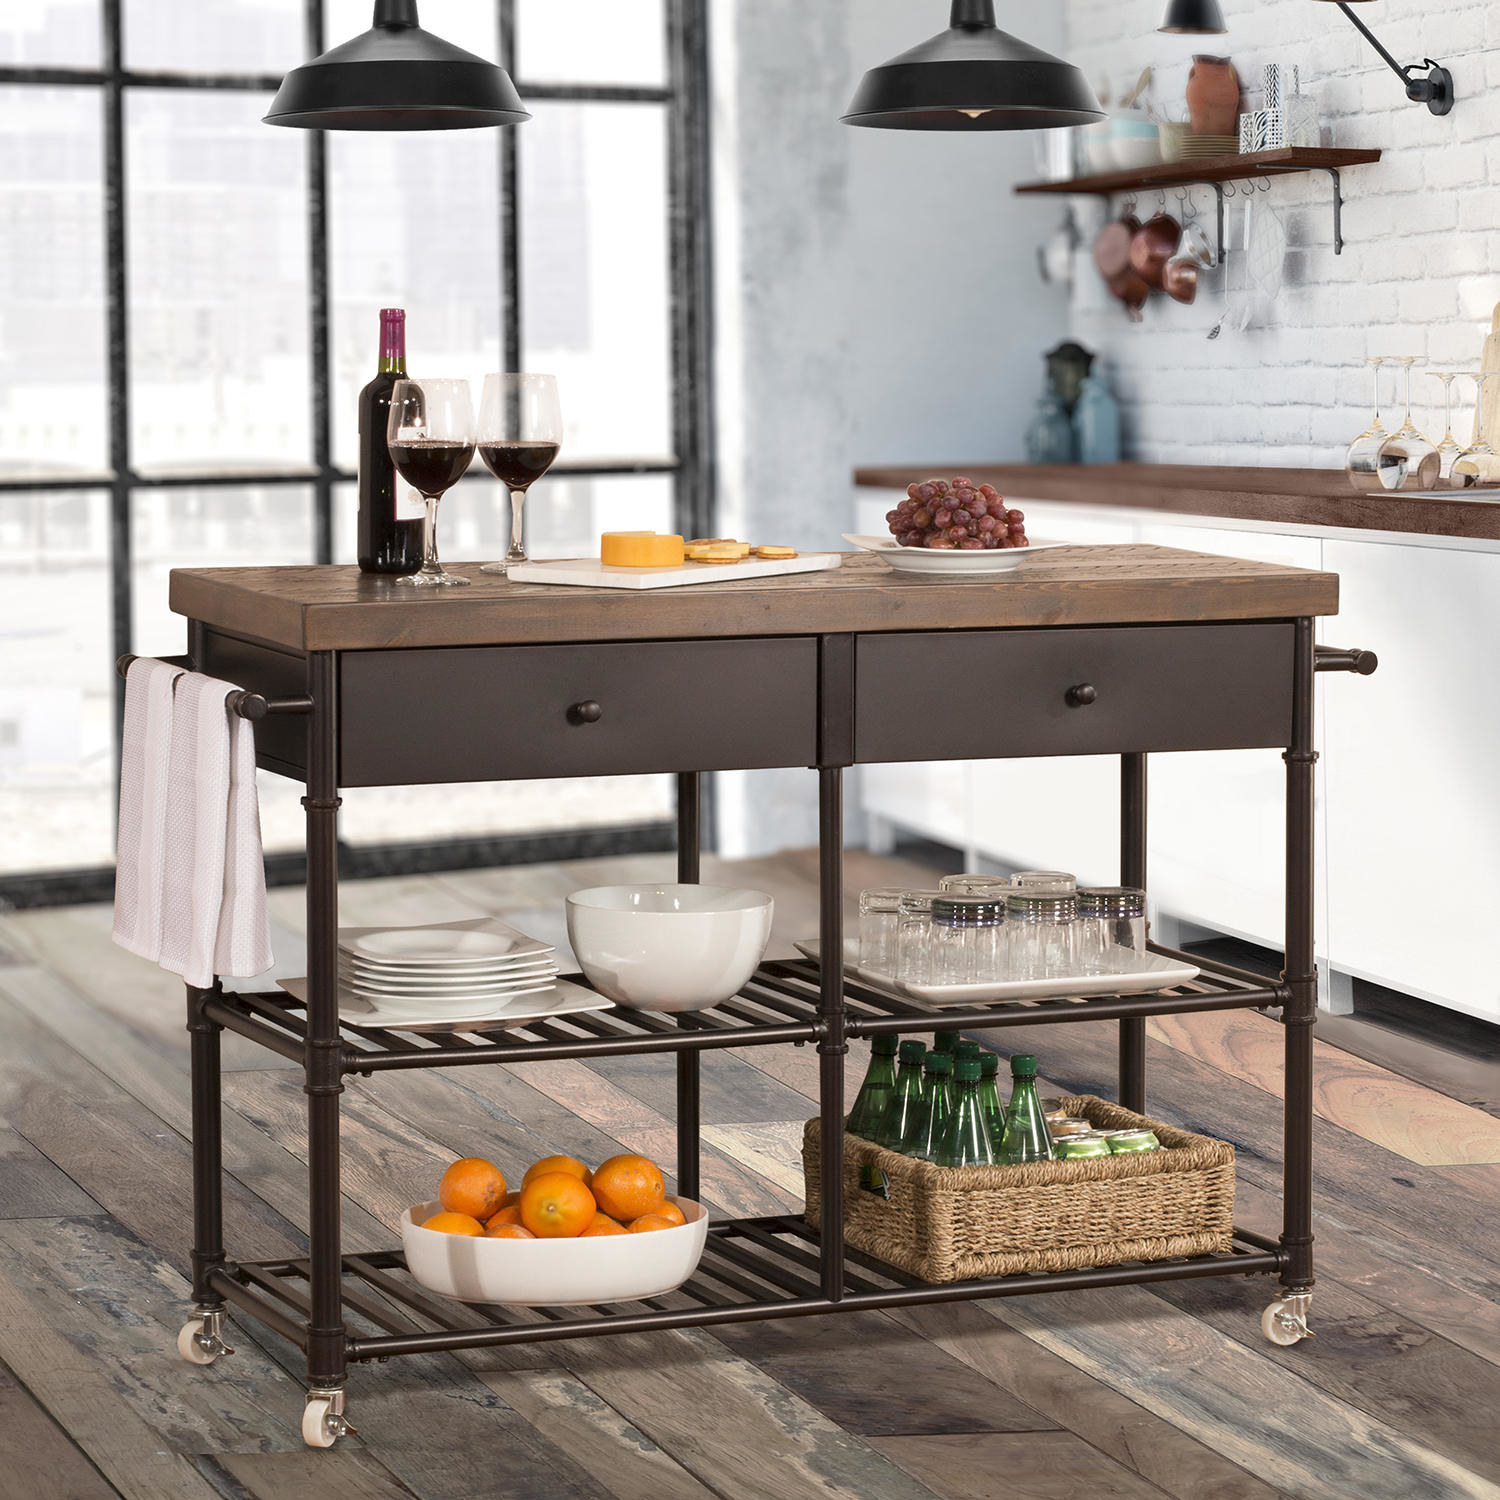 a brown cart on wheels with two shelves, two drawers, and a wooden tabletop